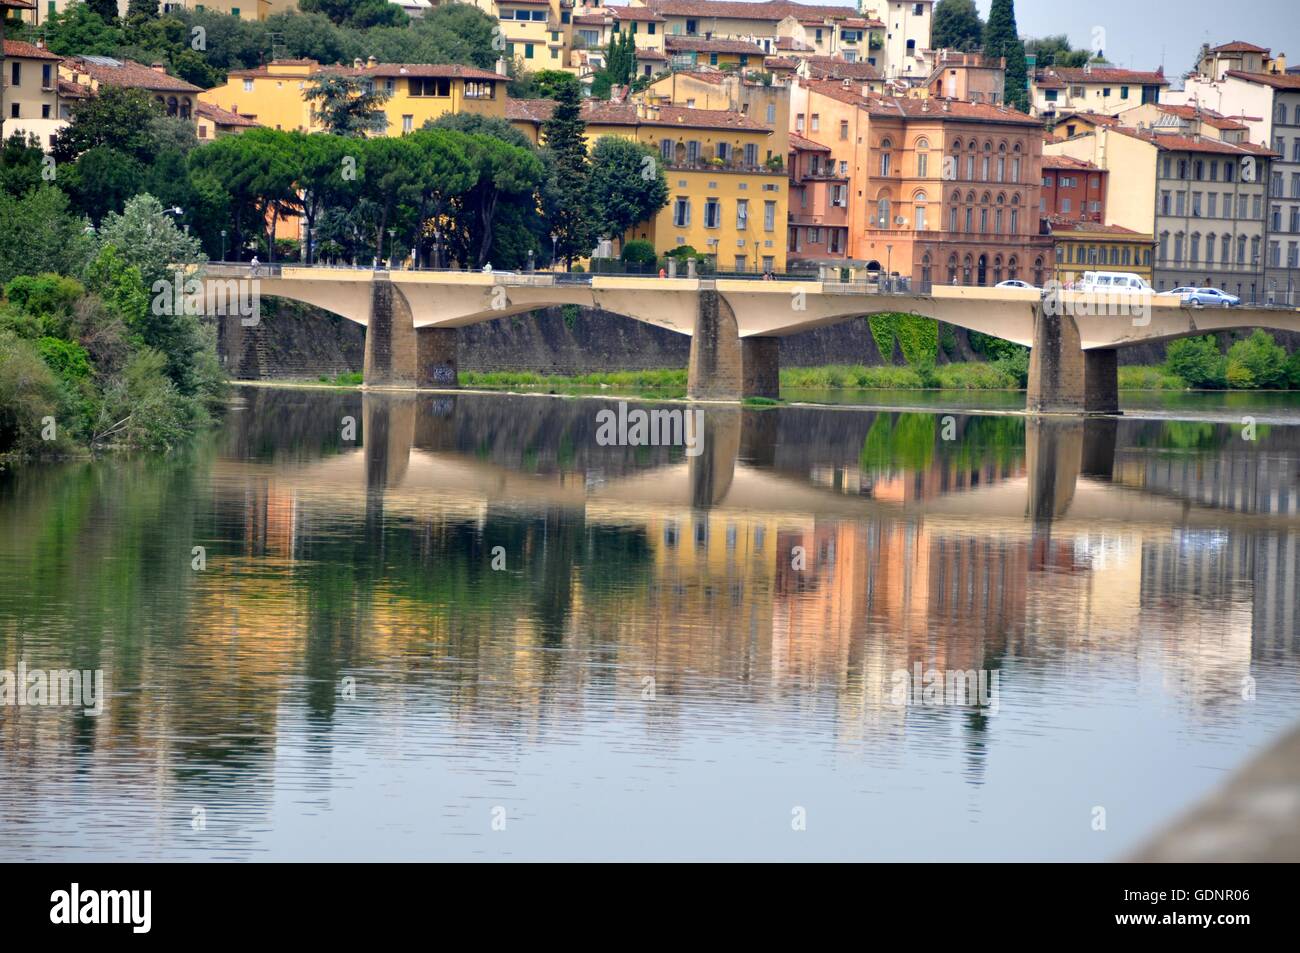 View of  buildings and bridge and their reflection over calm waters of Arno River in Florence, Italy on a hot summer day. Stock Photo